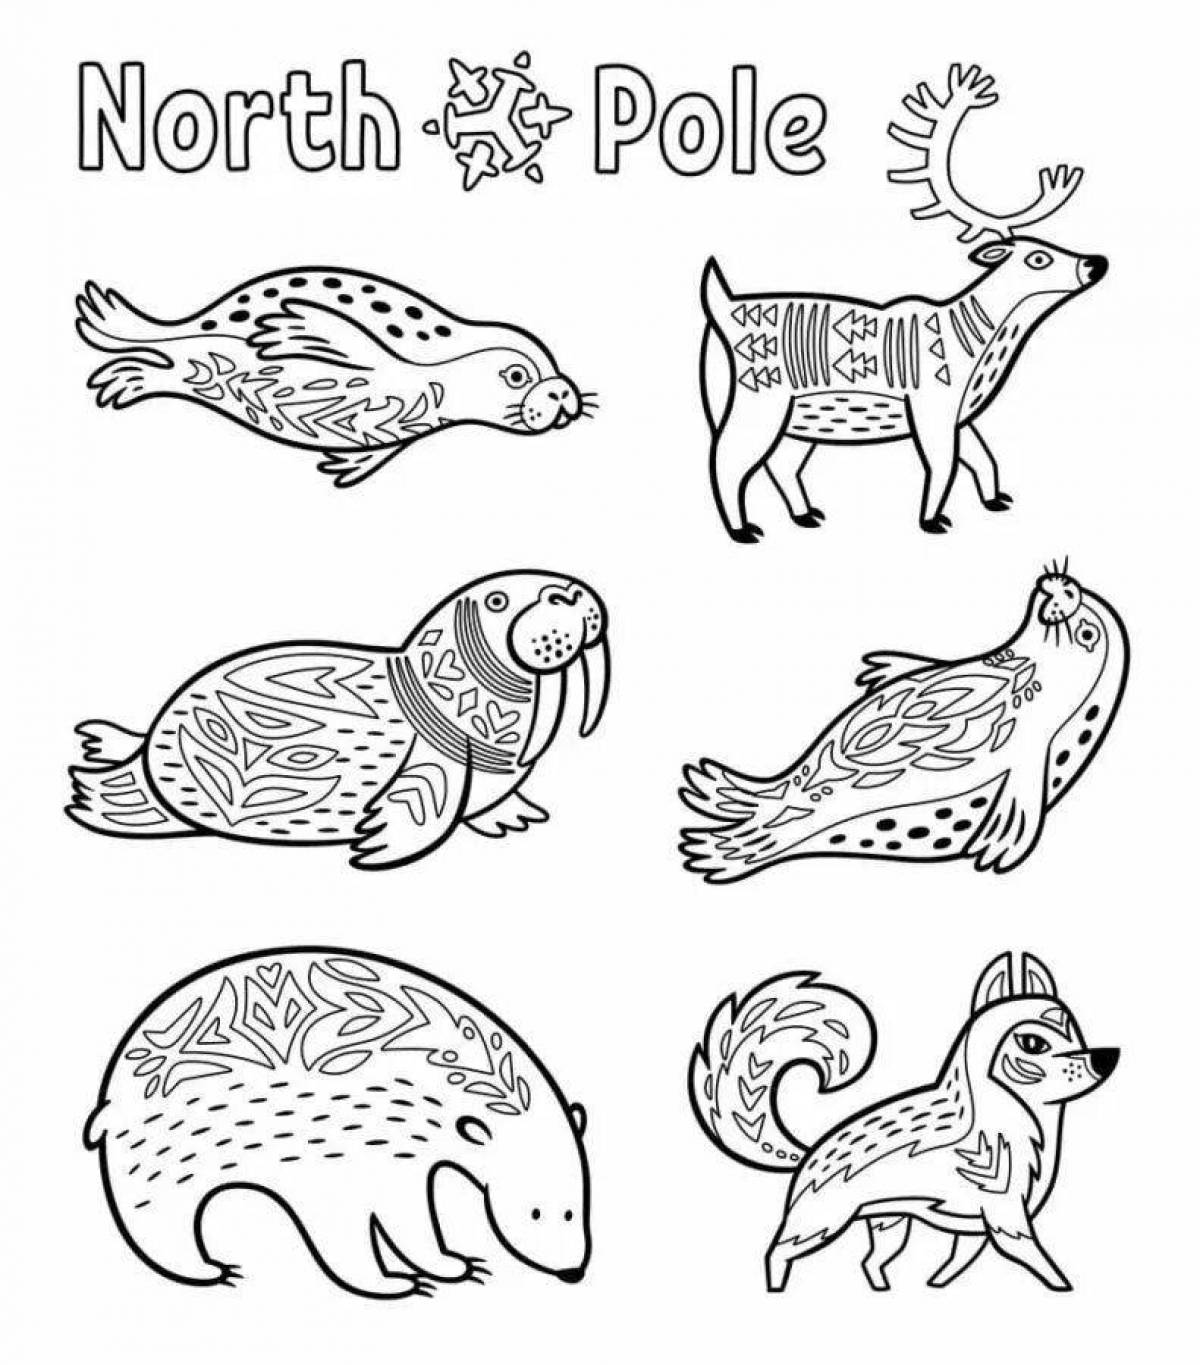 Exquisite north pole animal coloring book